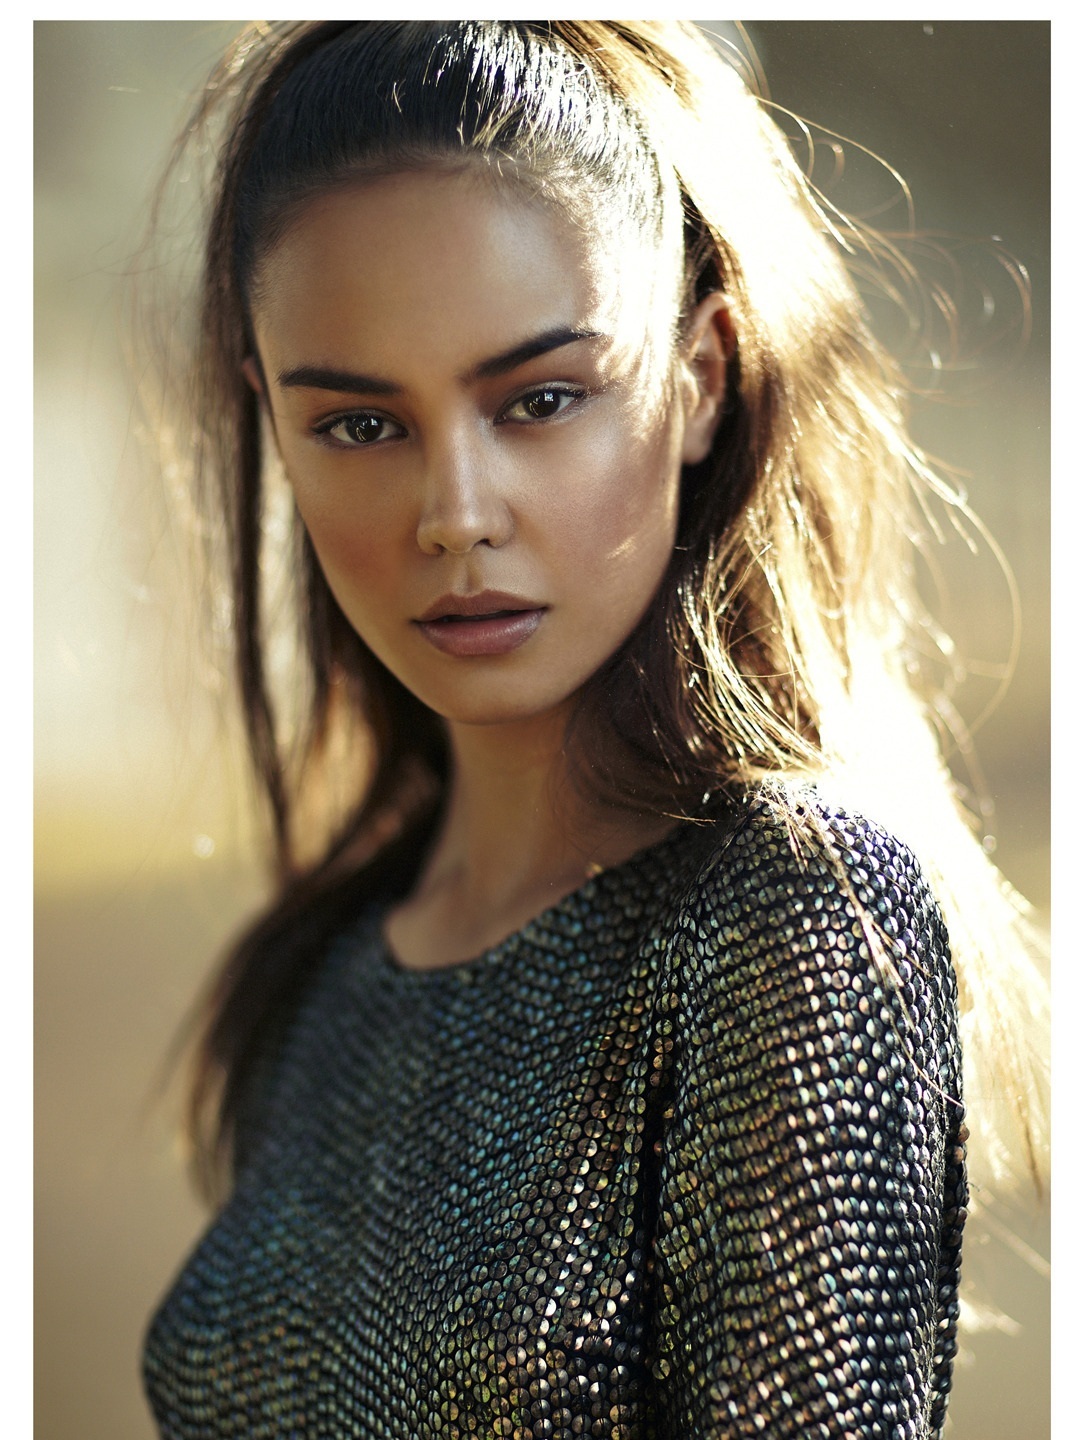 Courtney Eaton Picture Wallpaper Shared By Nance Fans Share Image